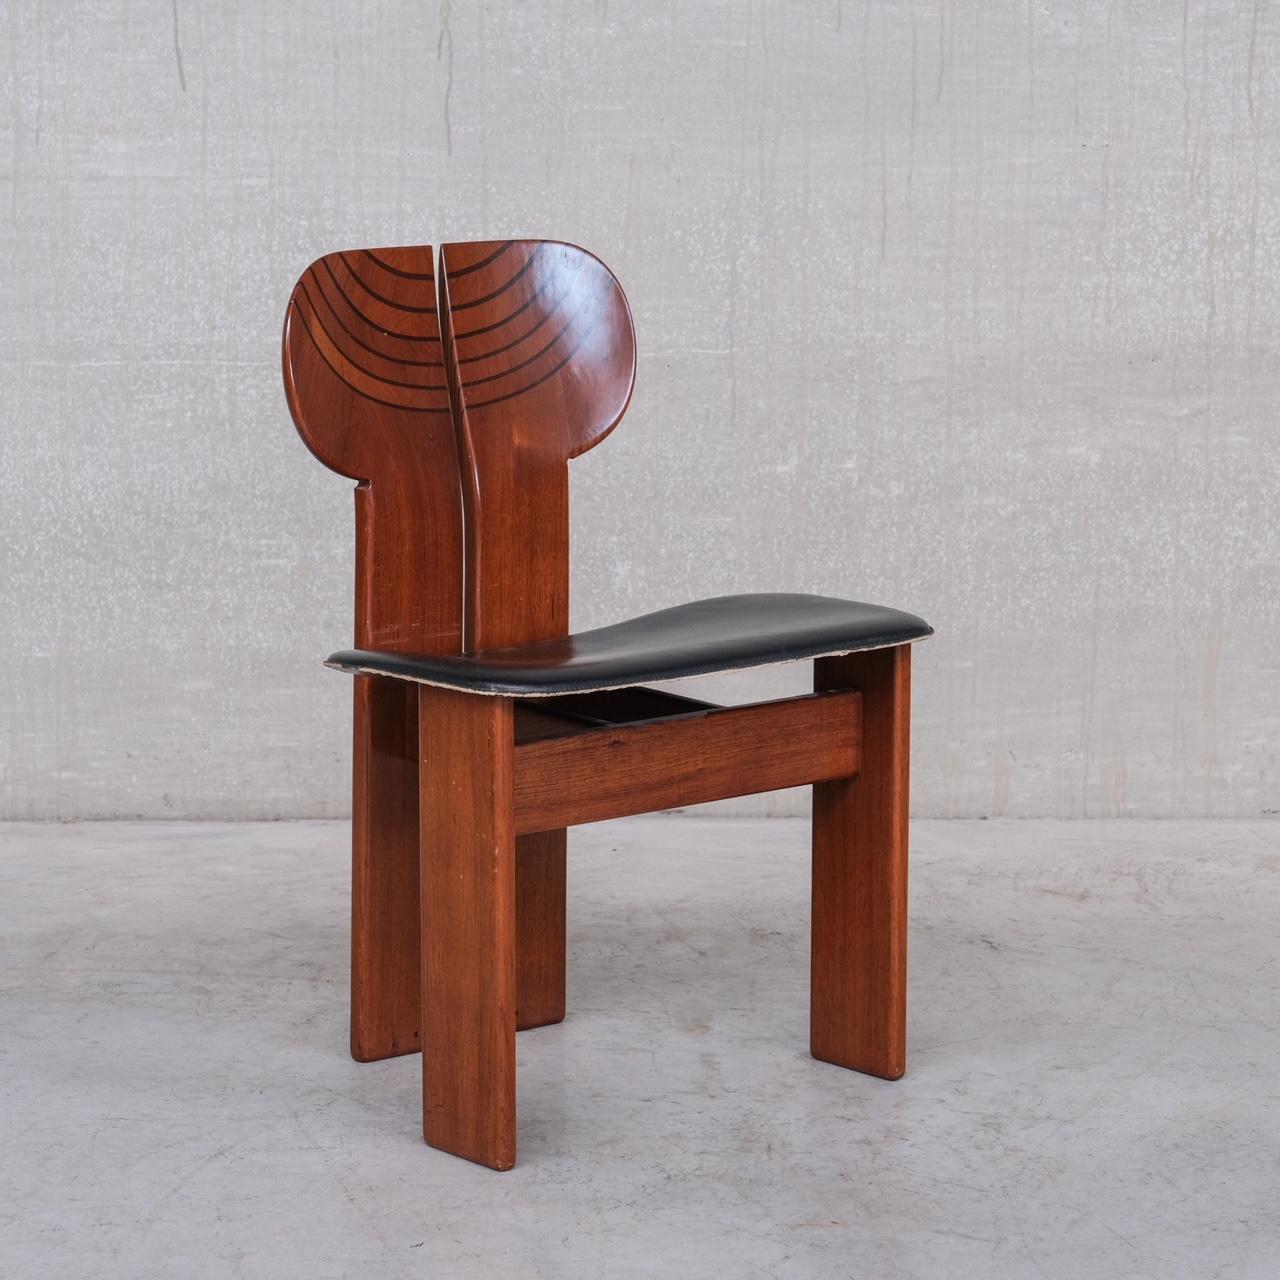 A set of six dining chairs, the scarce 'Africa' model.

Designed by Italian designers Tobia and Afra Scarpa. 

Italy, c1975. 

Walnut, ebony, brass and black leather. 

An exceptional collectable mid-century design. 

The original leather